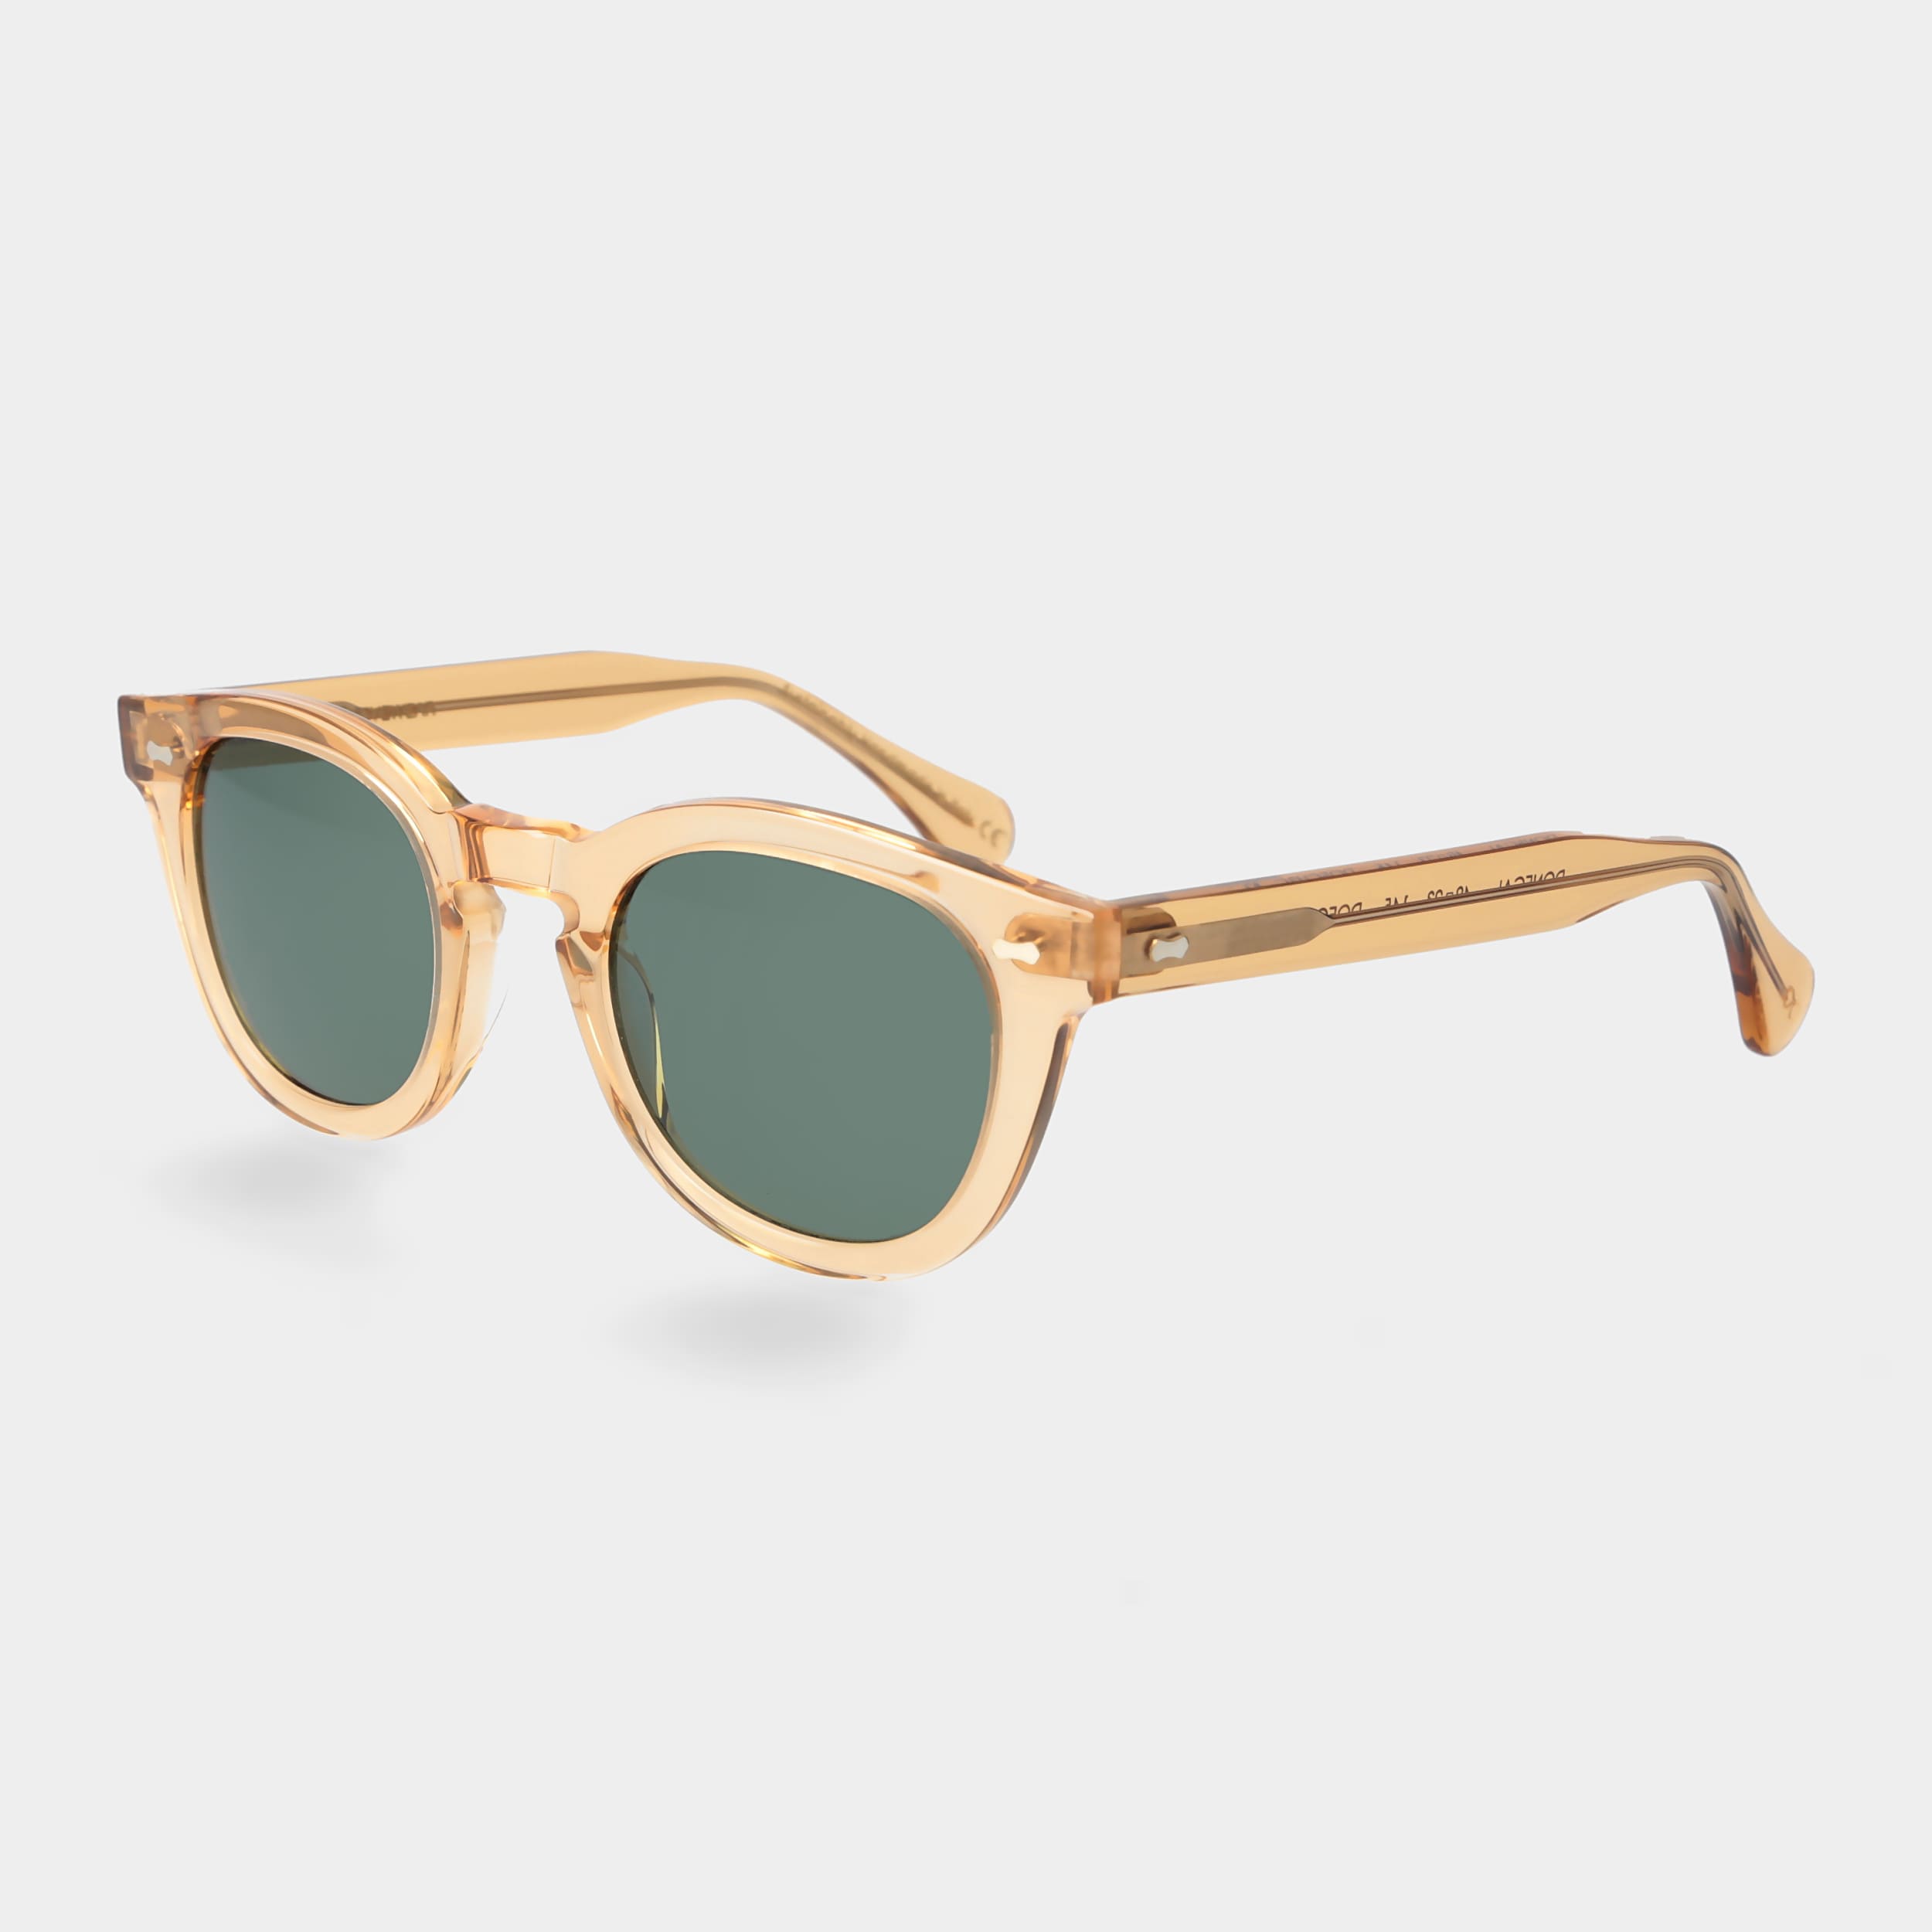 sunglasses-donegal-eco-champagne-bottle-green-sustainable-tbd-eyewear-total